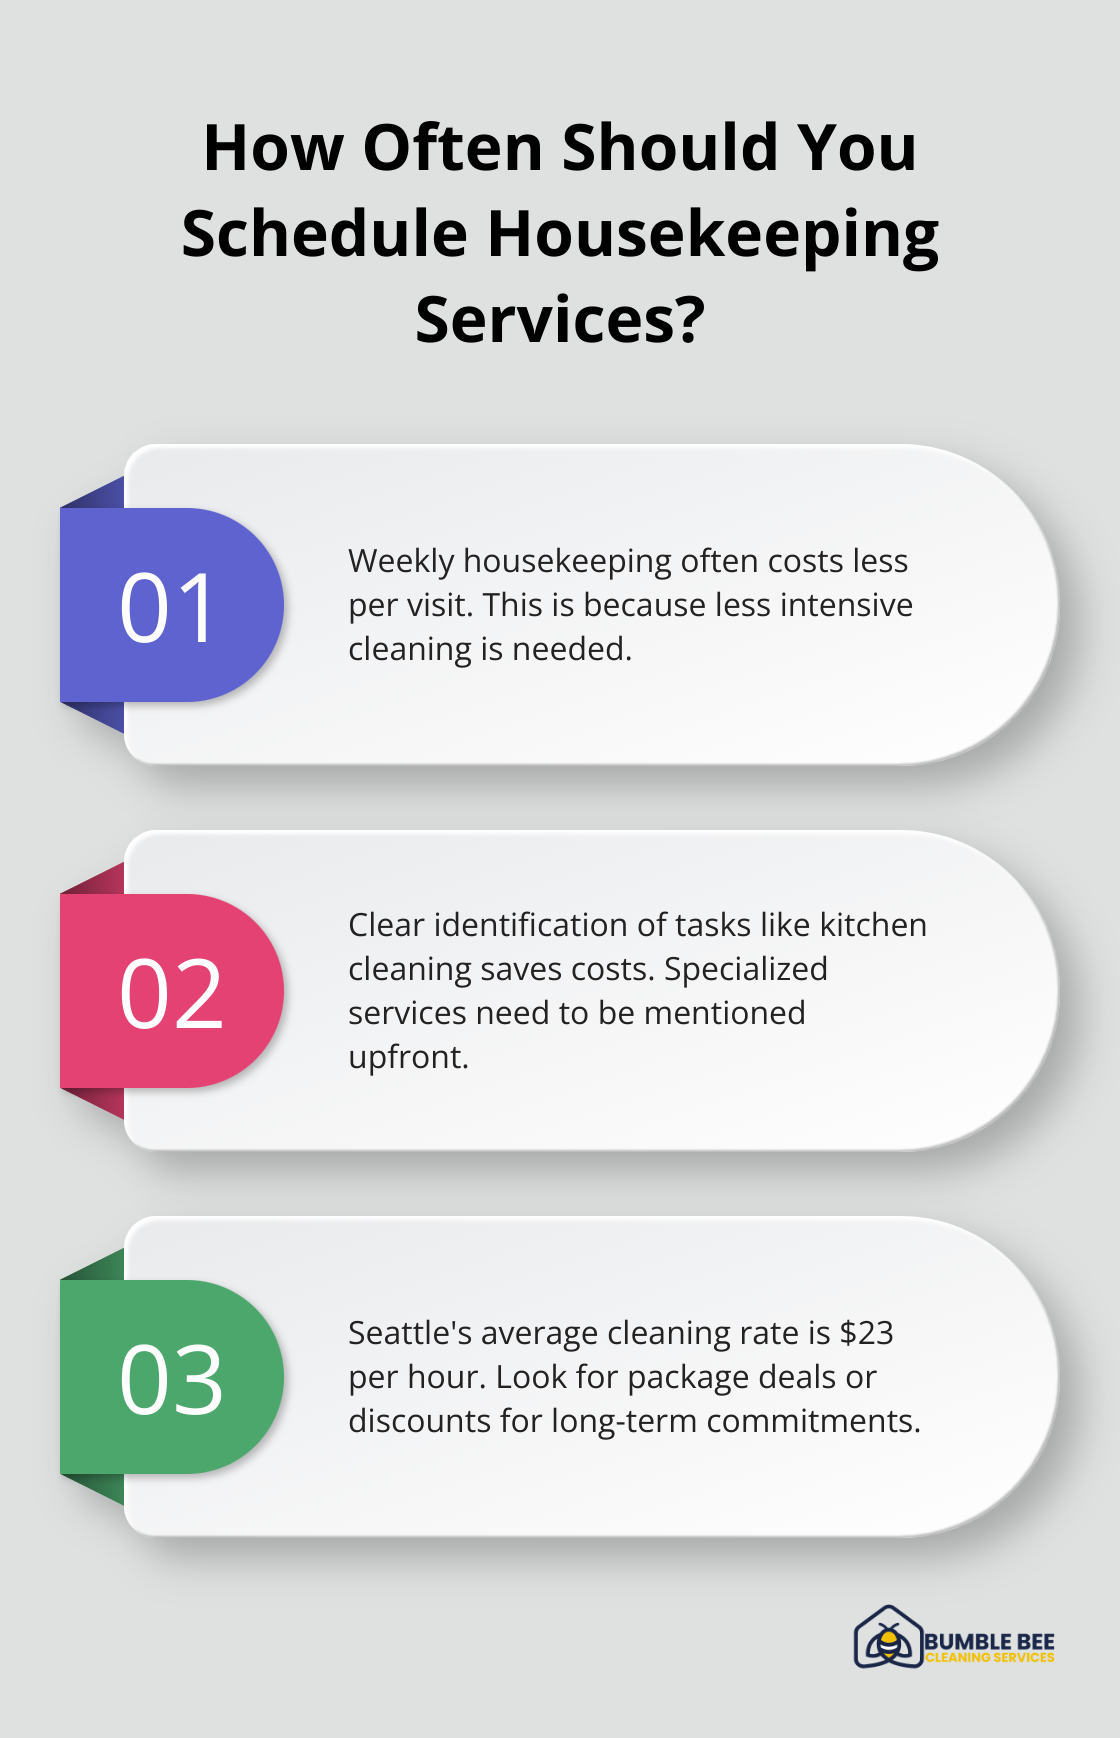 Fact - How Often Should You Schedule Housekeeping Services?